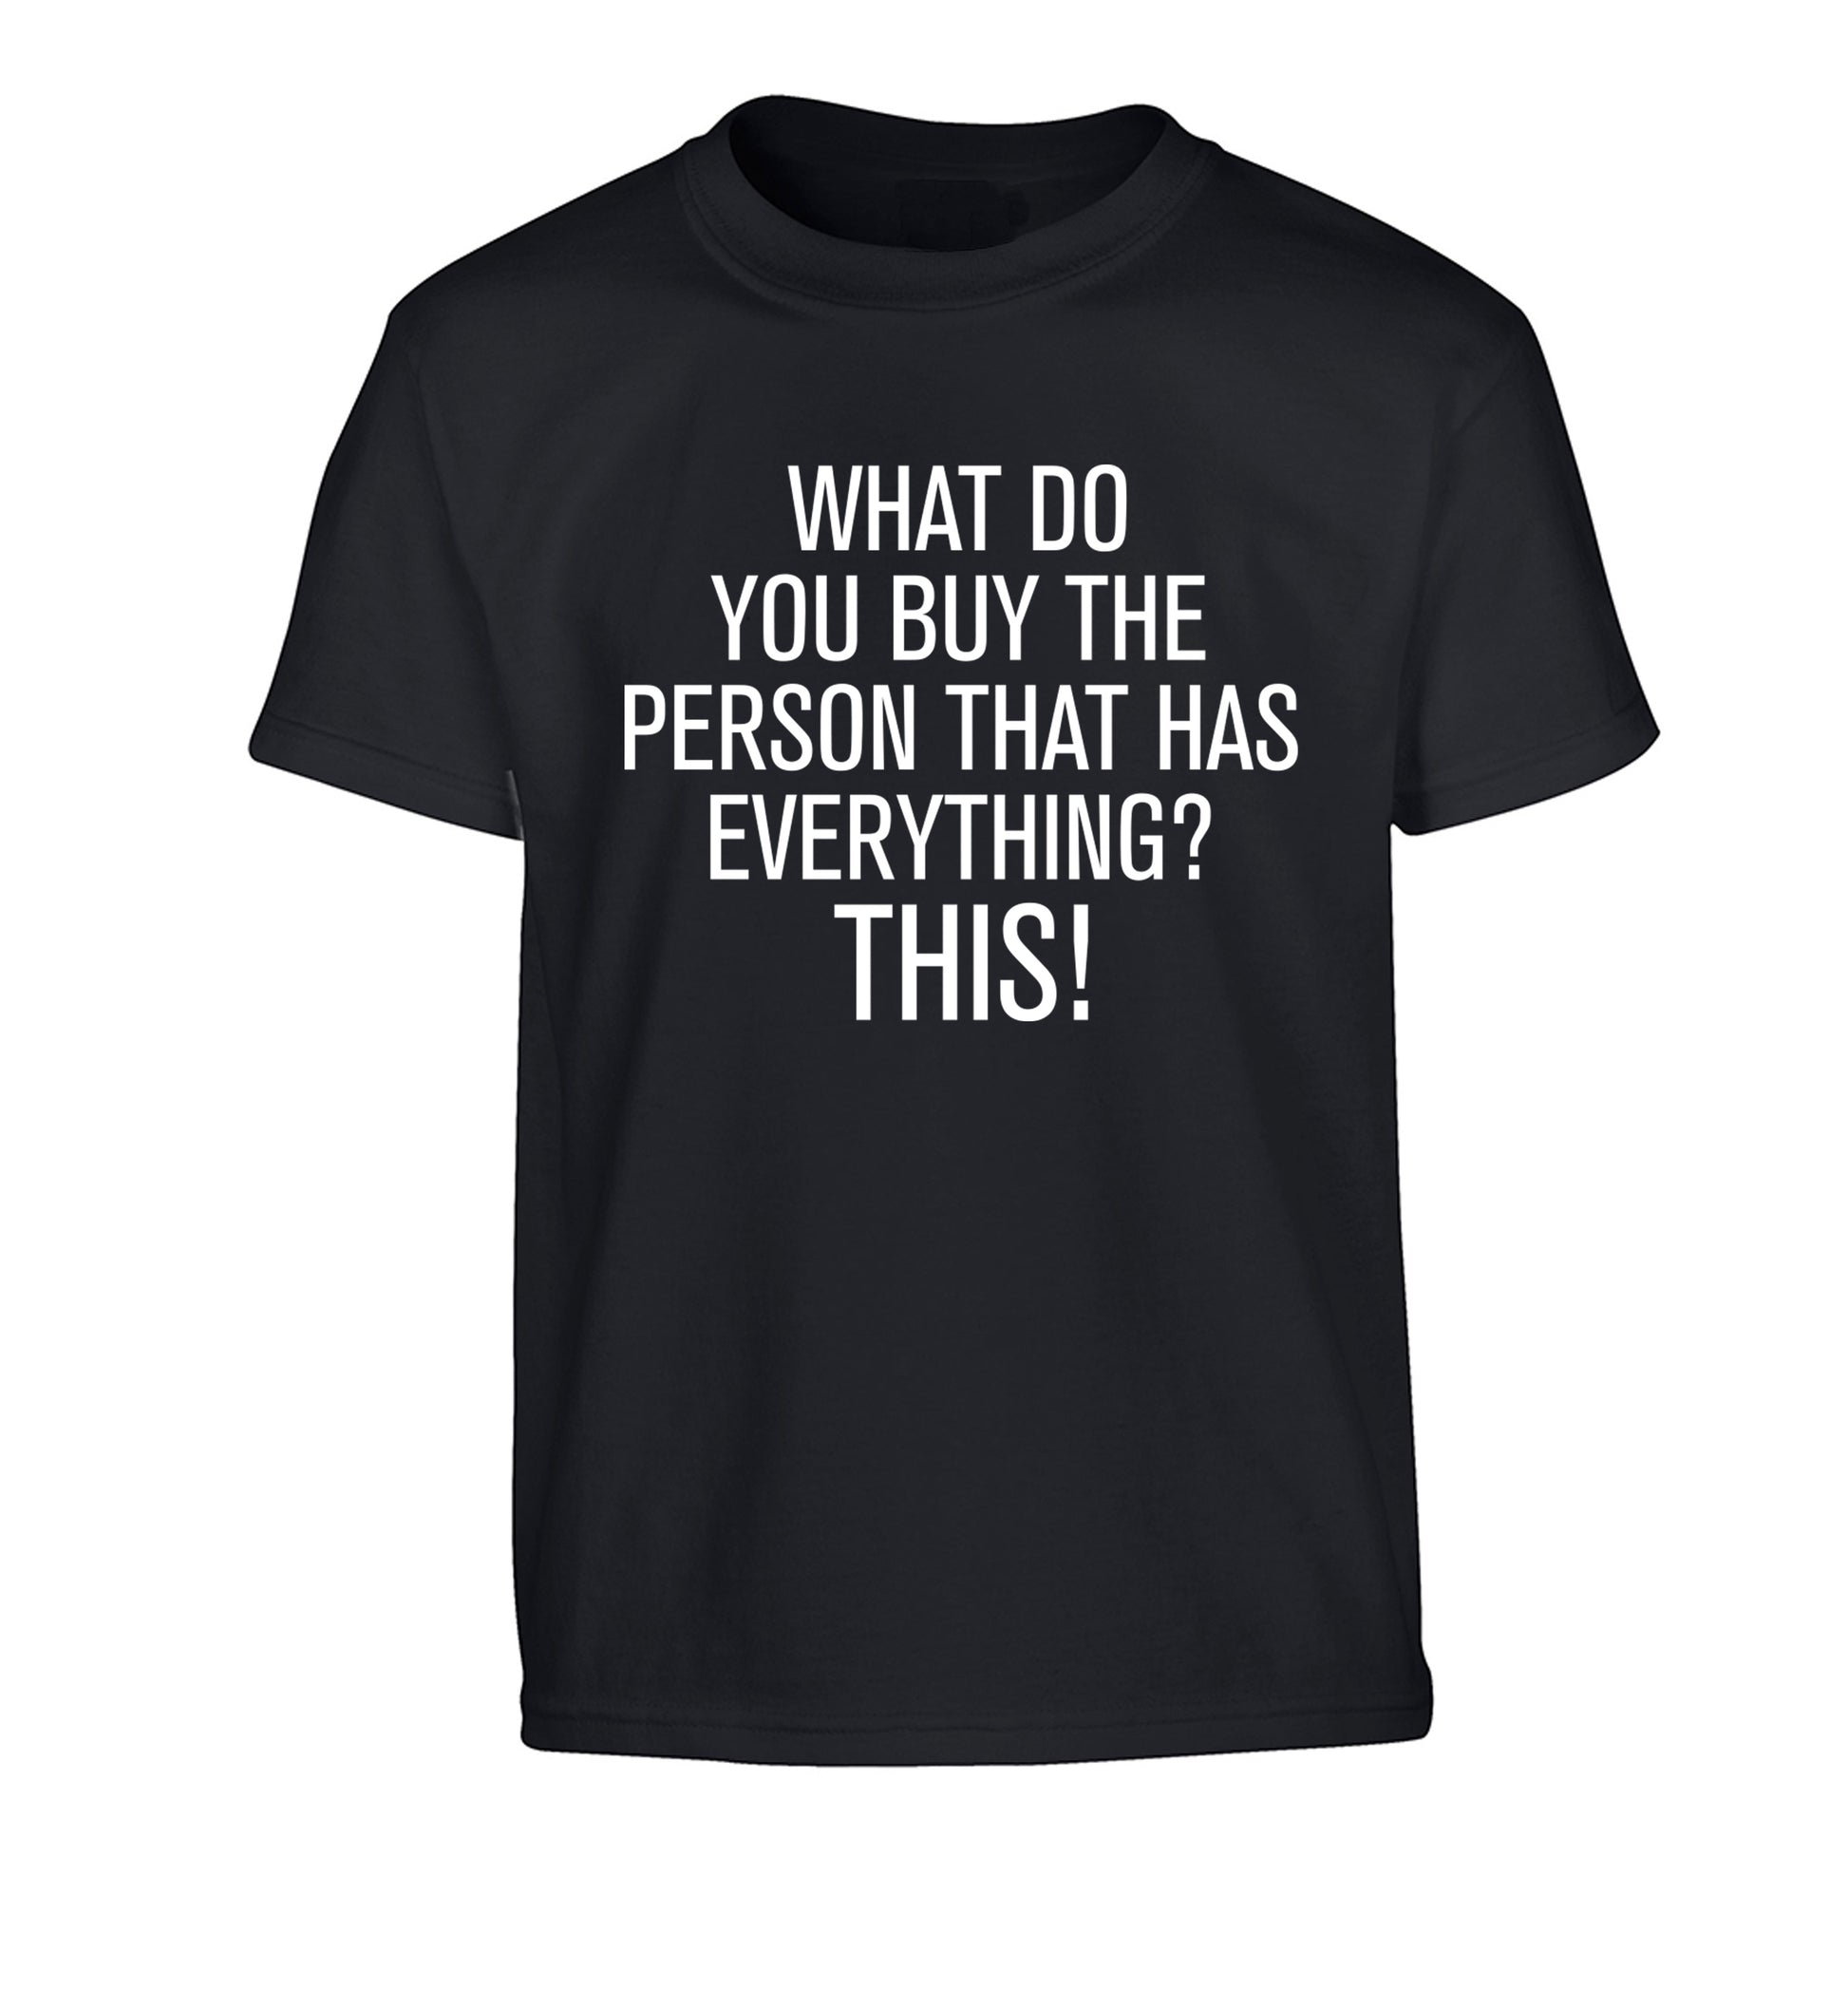 What do you buy the person that has everything? This! Children's black Tshirt 12-13 Years